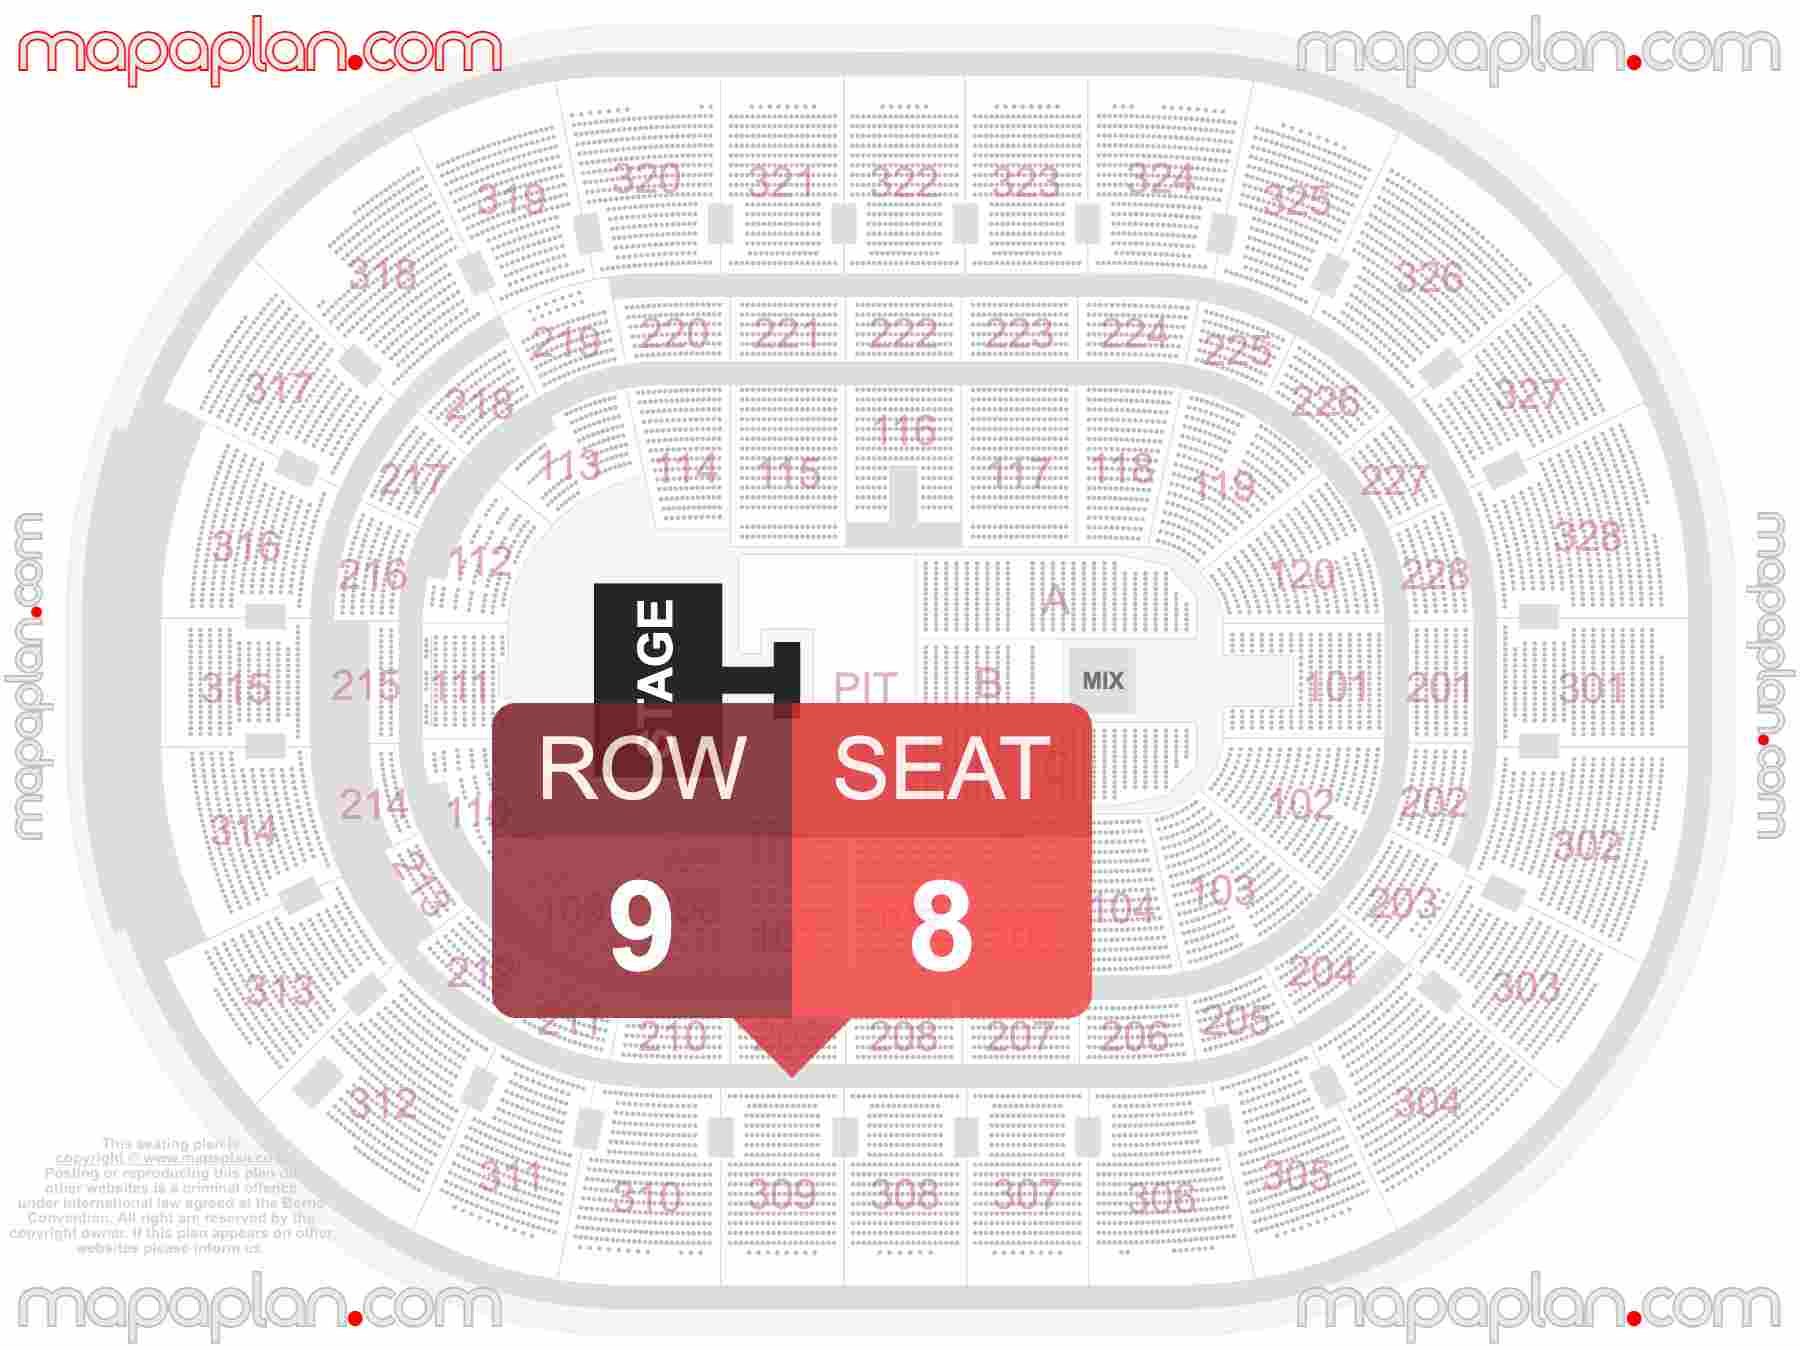 Ottawa Canadian Tire Centre seating map Concert with extended catwalk runway B-stage seating map with exact section numbers showing best rows and seats selection 3d layout - Best interactive seat finder tool with precise detailed location data